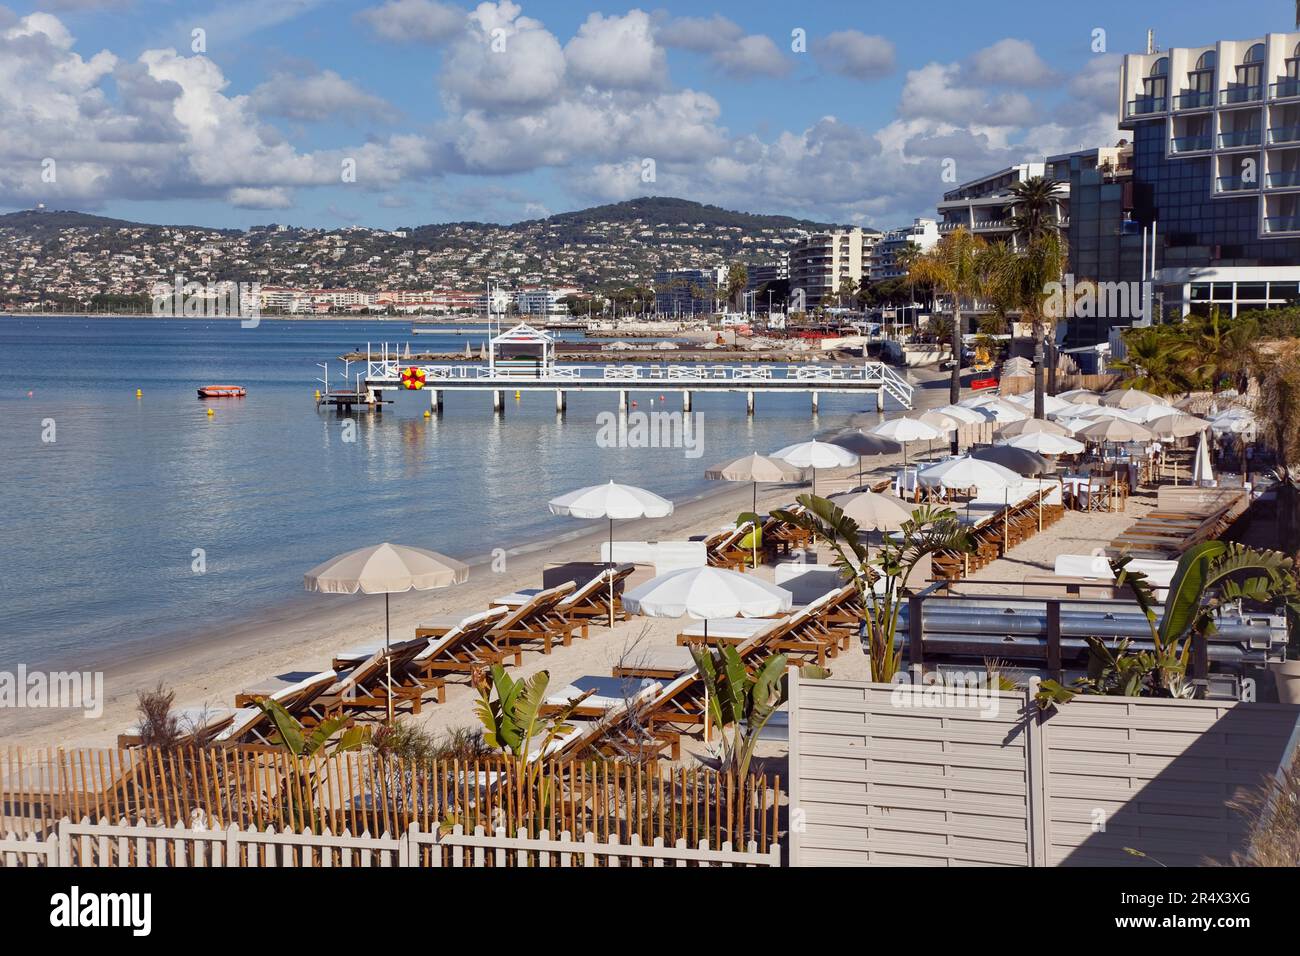 France, Provence-Alps, Cote d'Azur, Antibes Juan-les-Pins, Beach with tourists sunbathing and swimming in the sea. Stock Photo